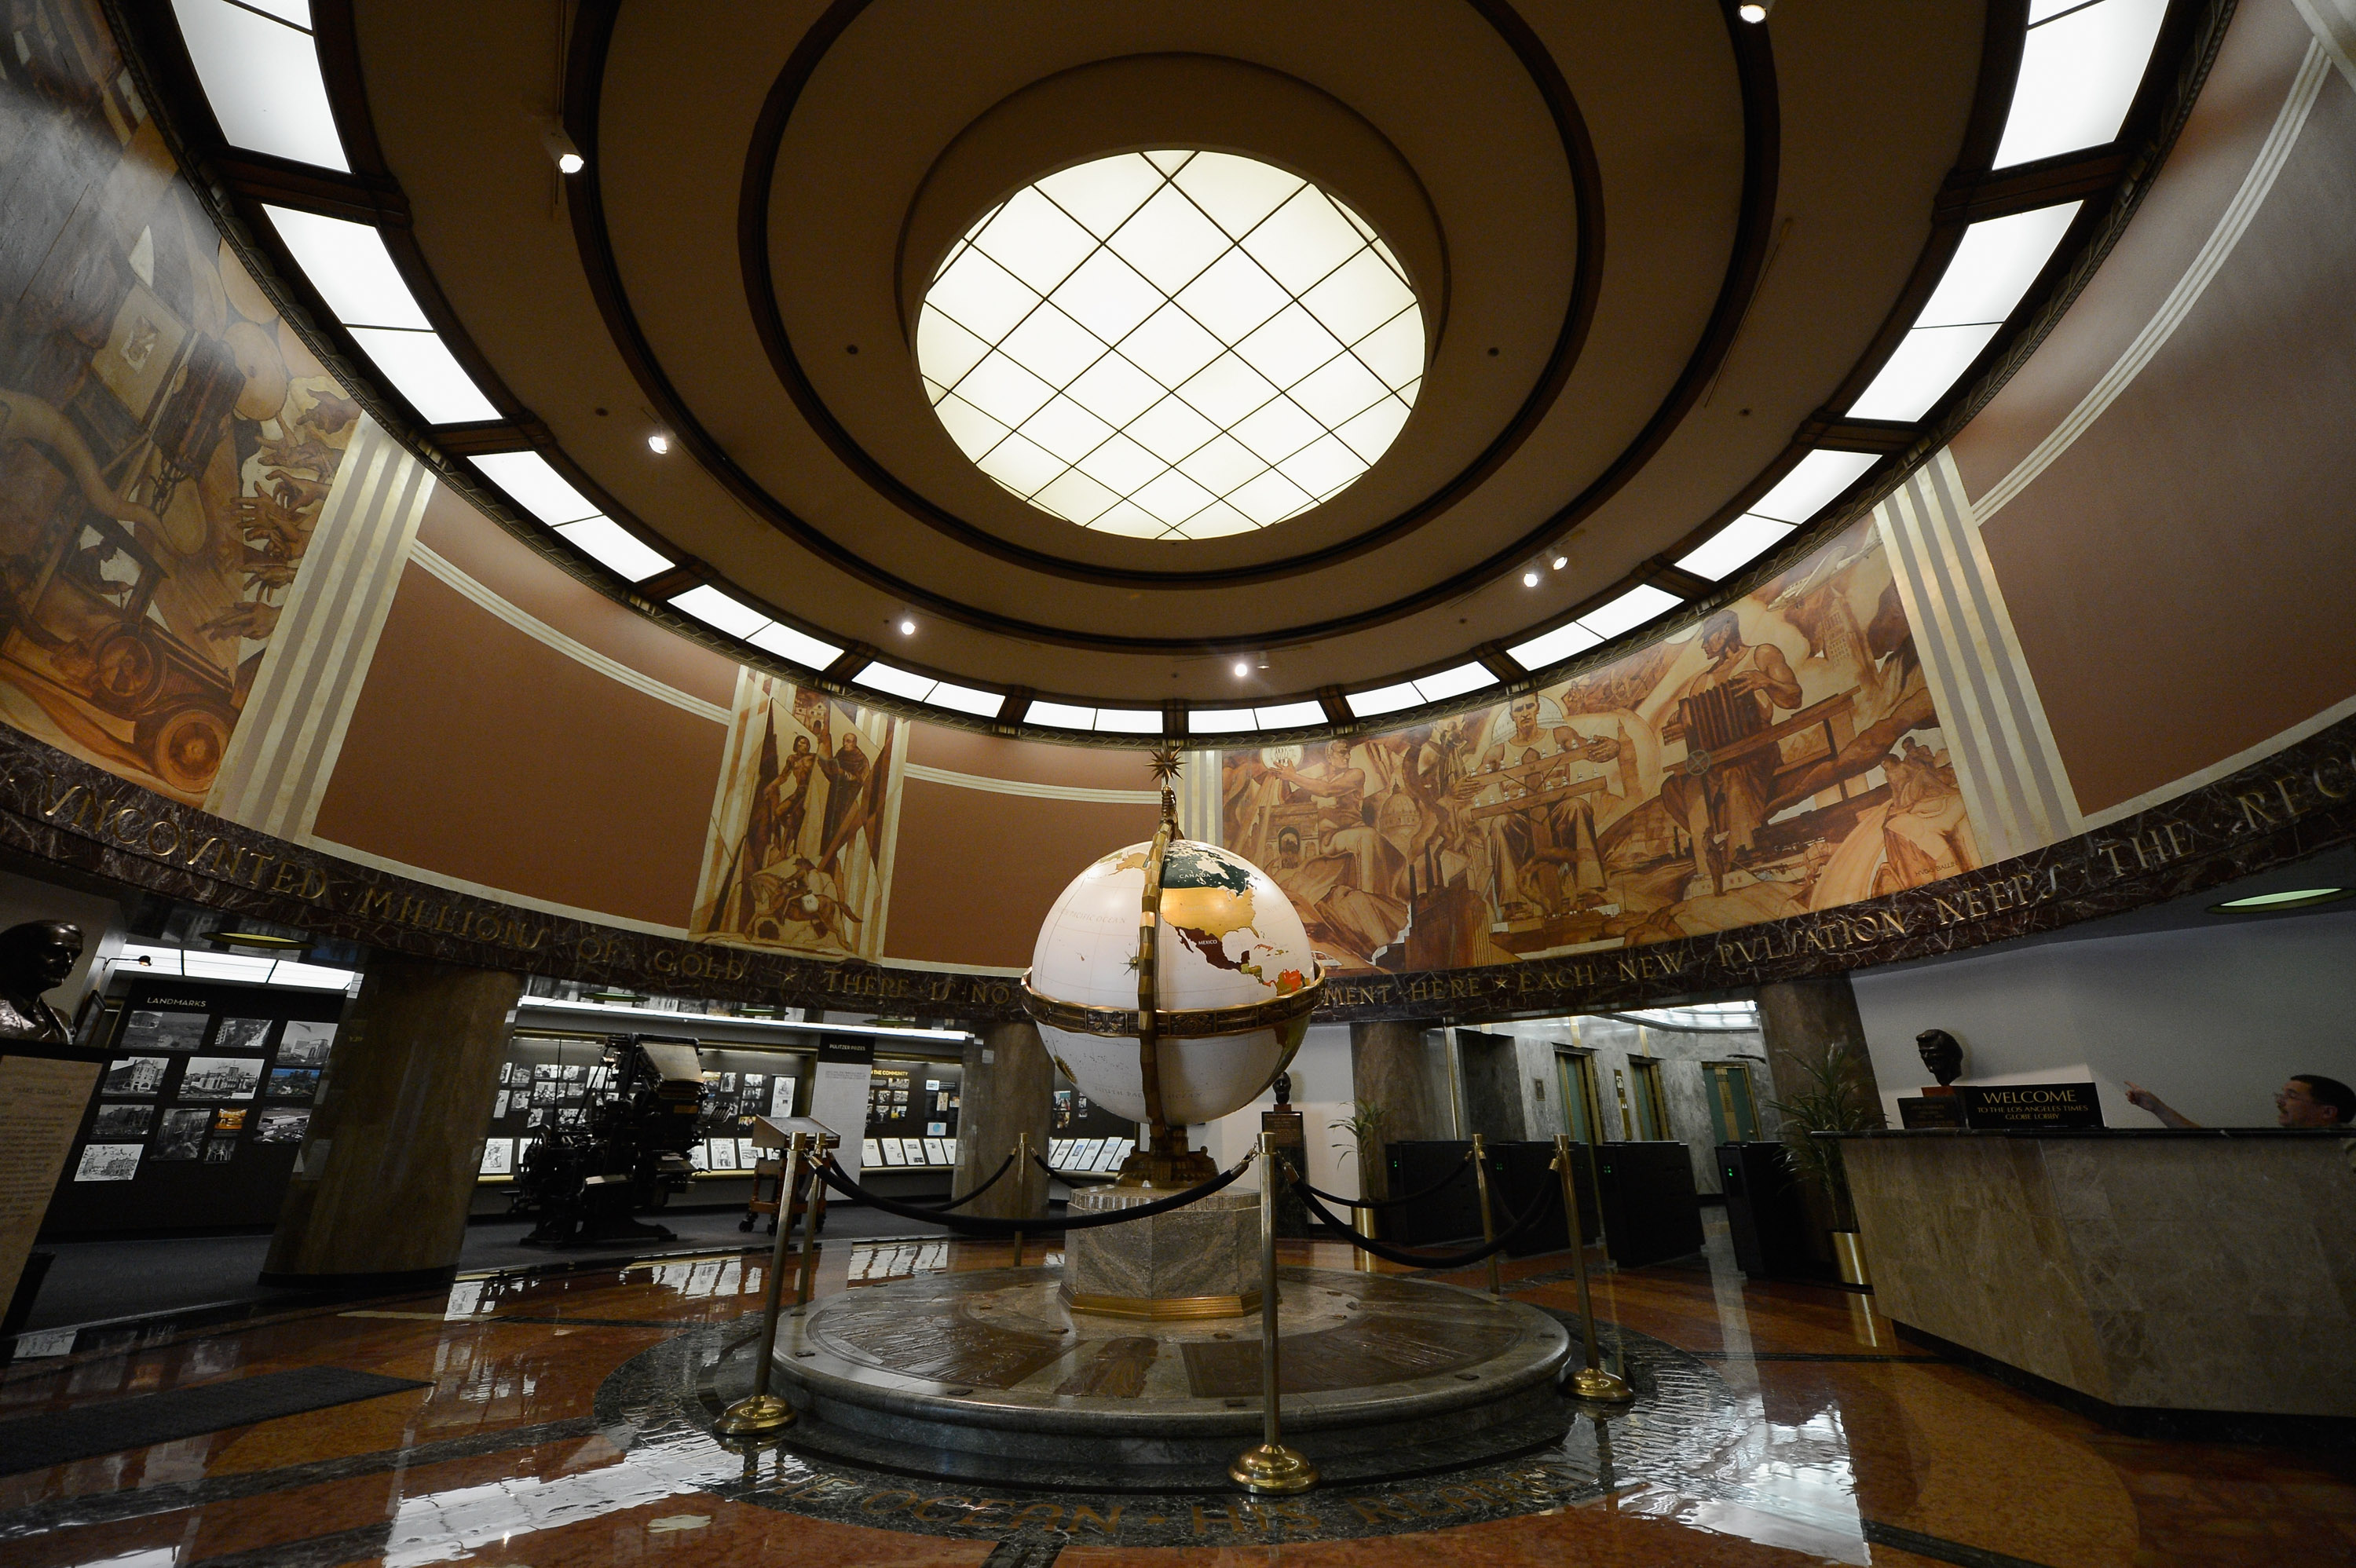 The lobby entrance of Los Angeles Times building